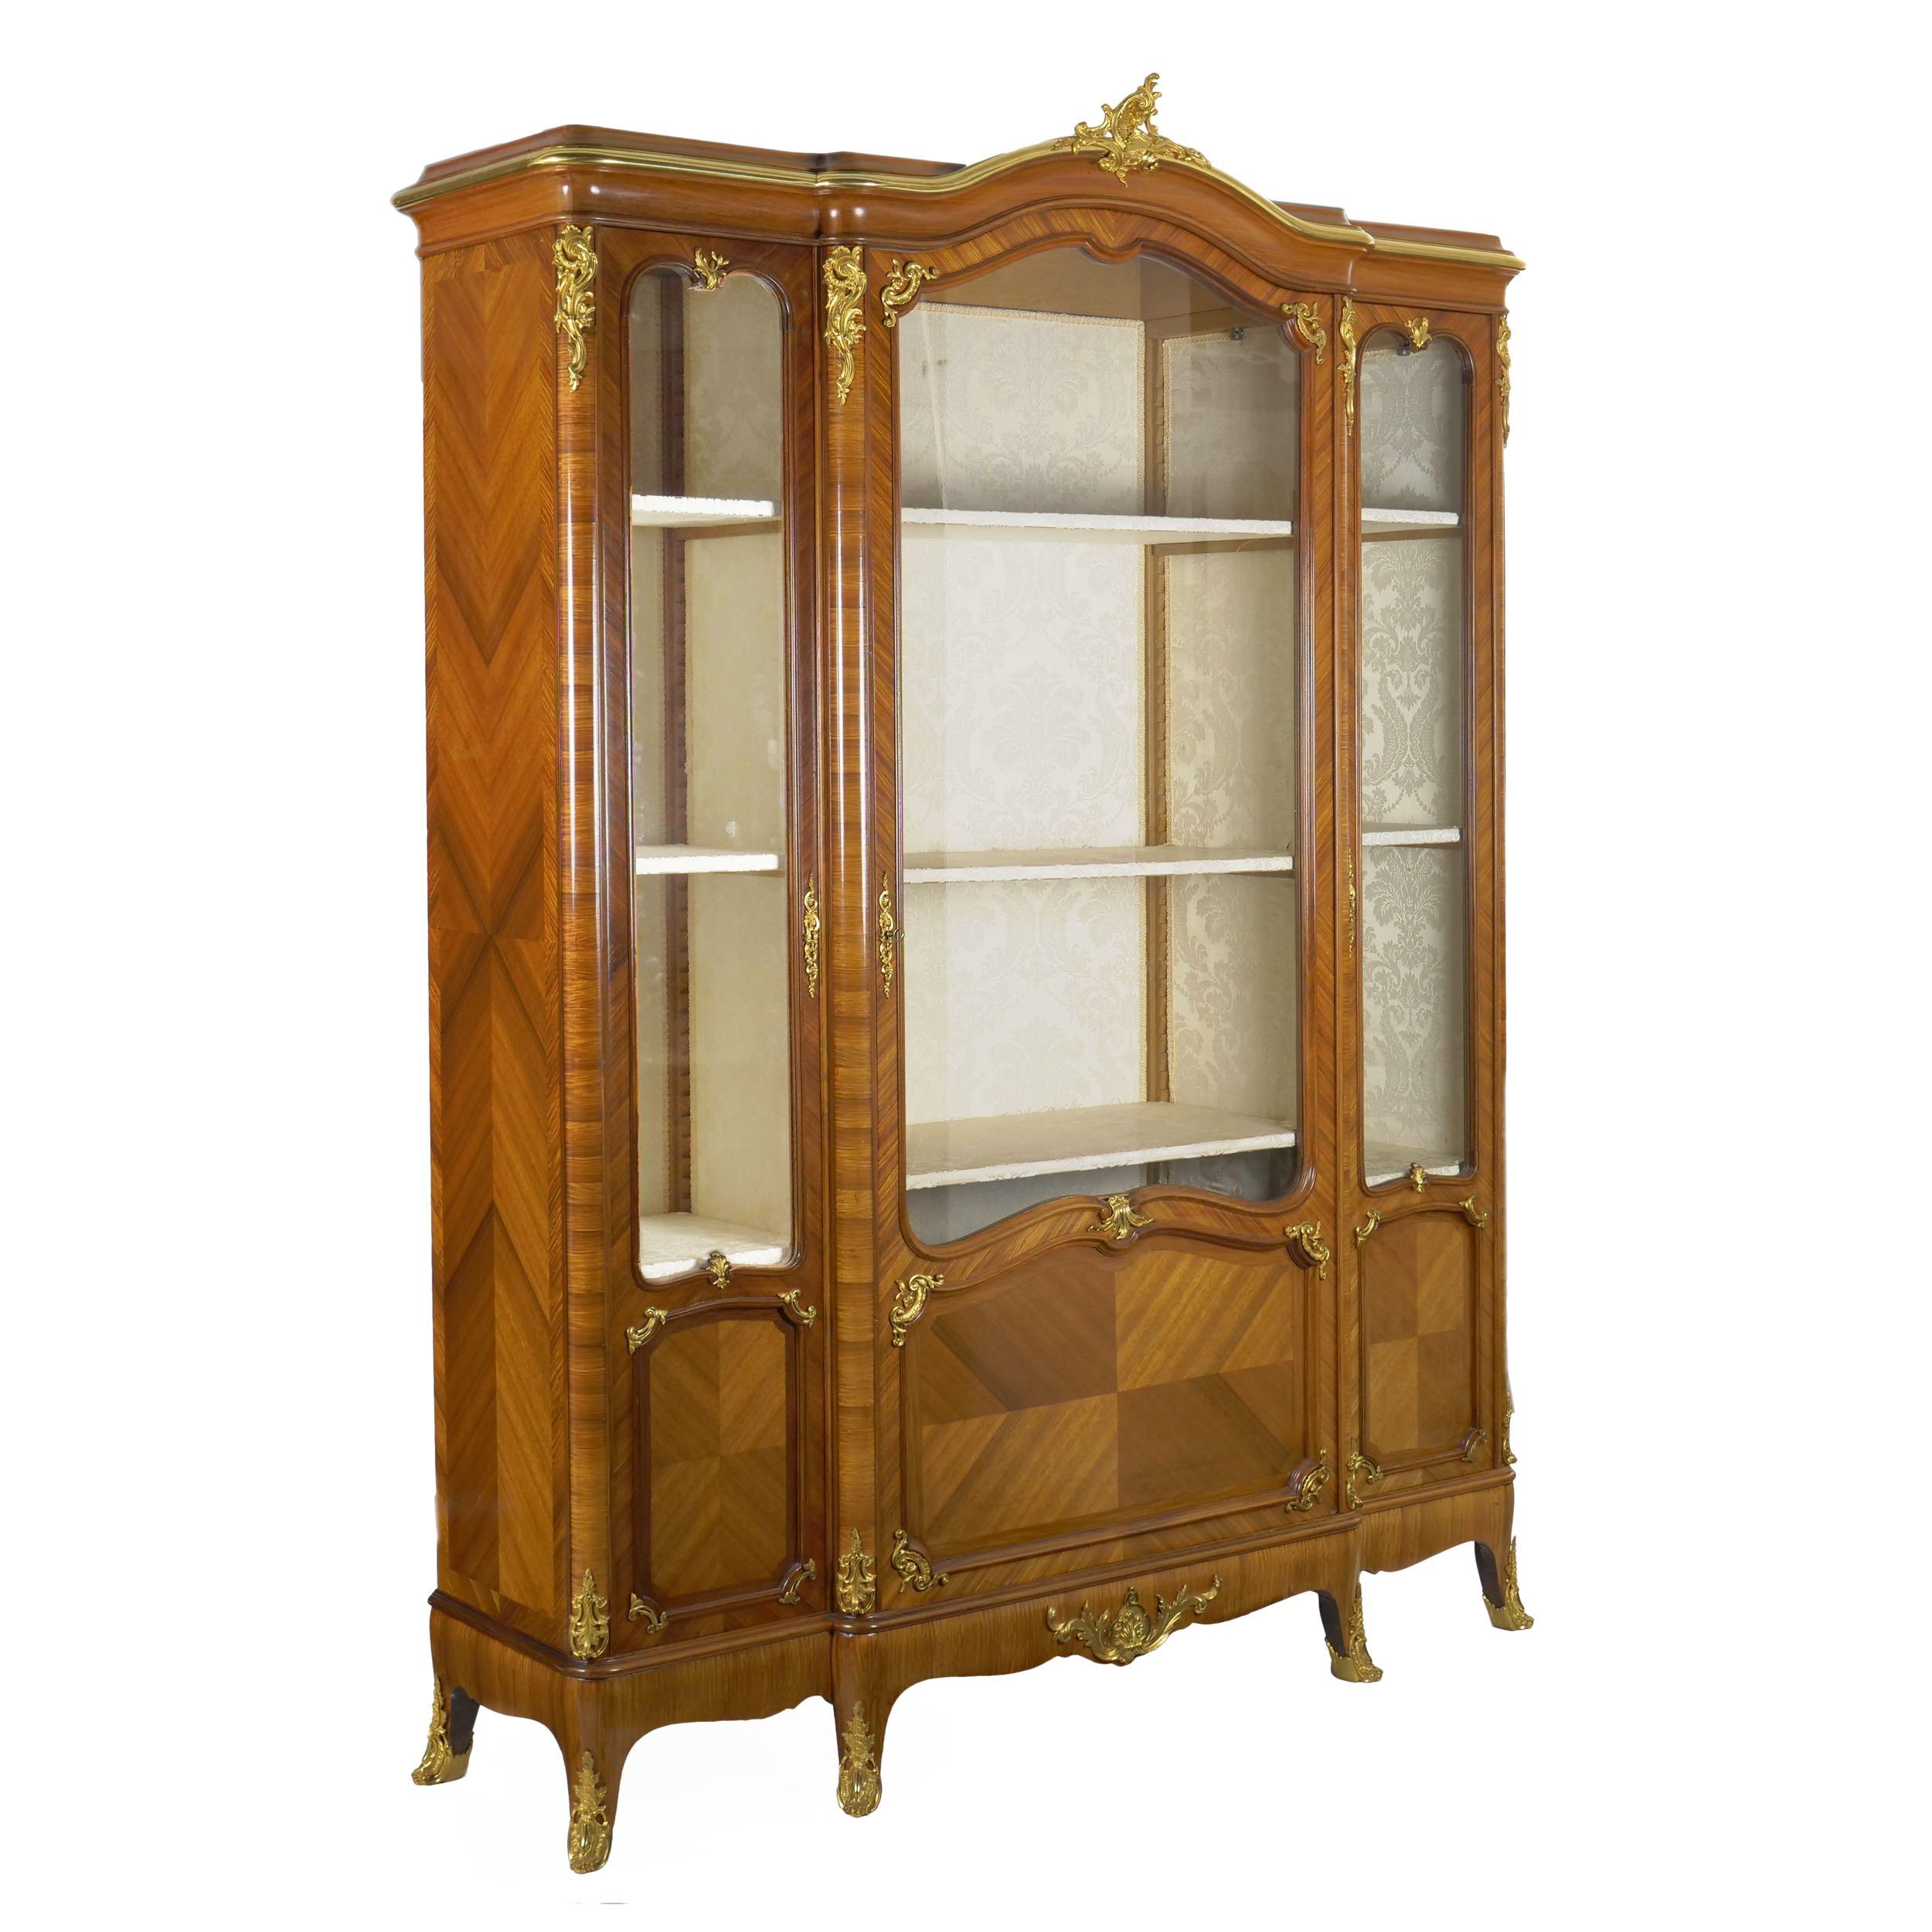 An exceedingly fine work of art, this bookcase cabinet is of the highest quality, designed with a careful eye to form, function and longevity. Designed with an eye to the Louis XV period, it is a product of the turn of the century, crafted between